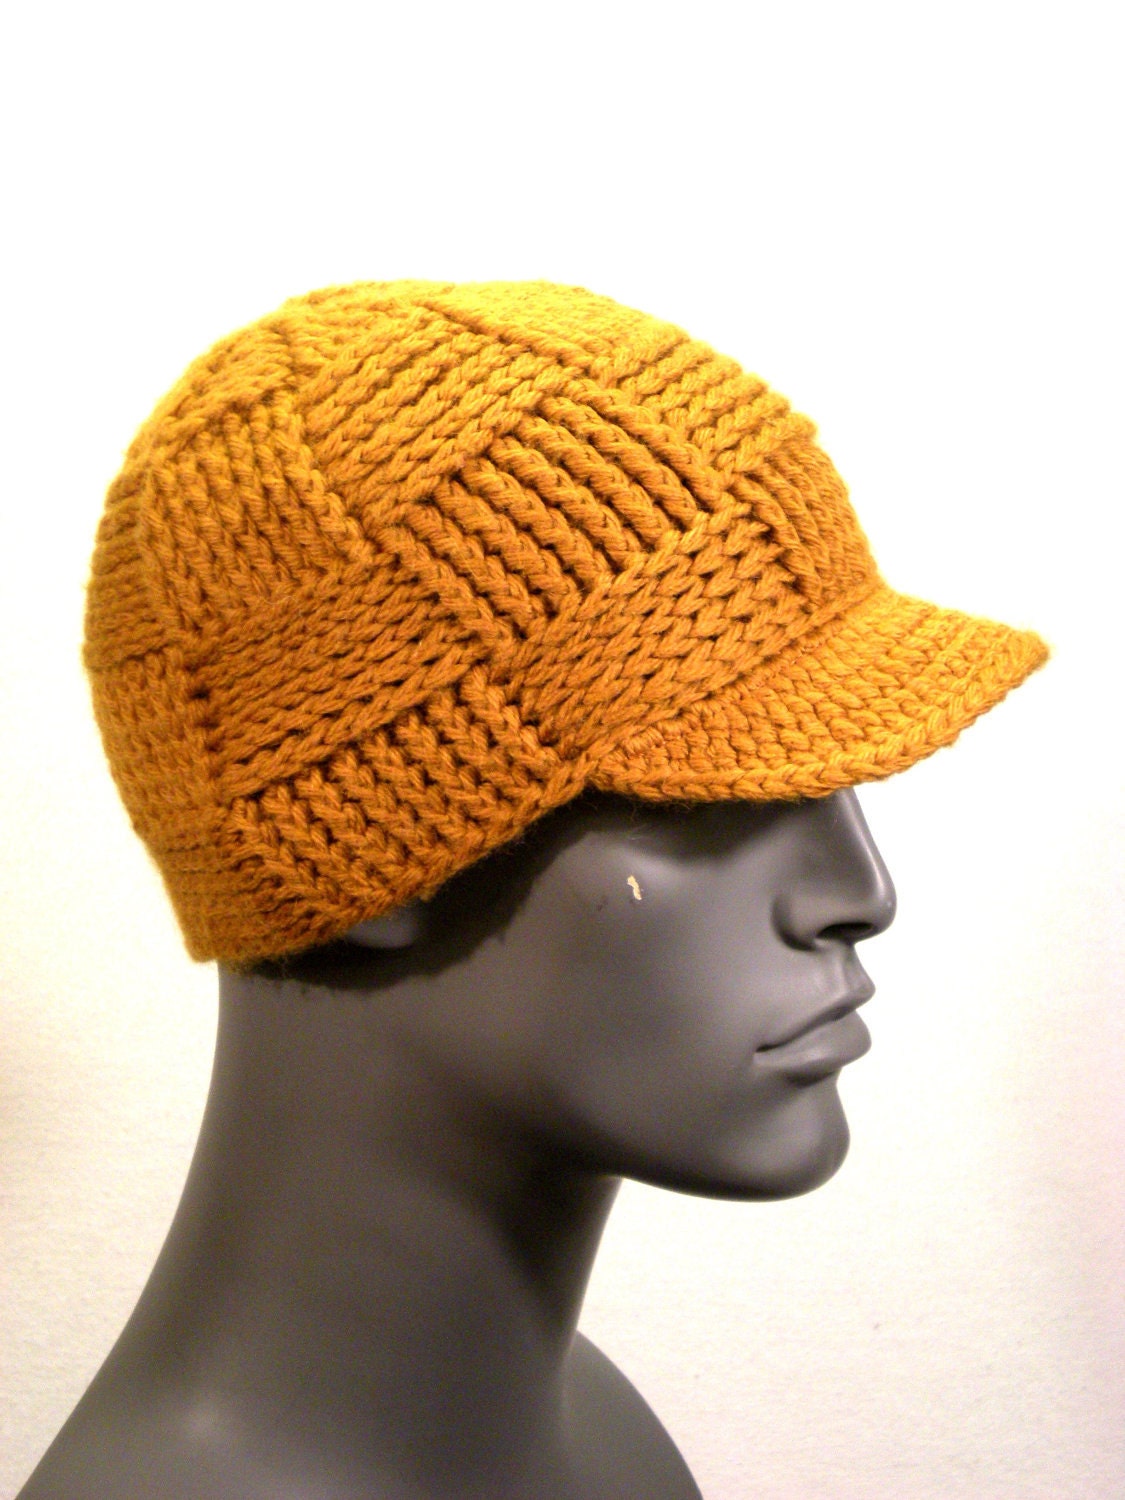 SALE - The Weaver Beanie with Bill - Medium - Wool - Wheat Color